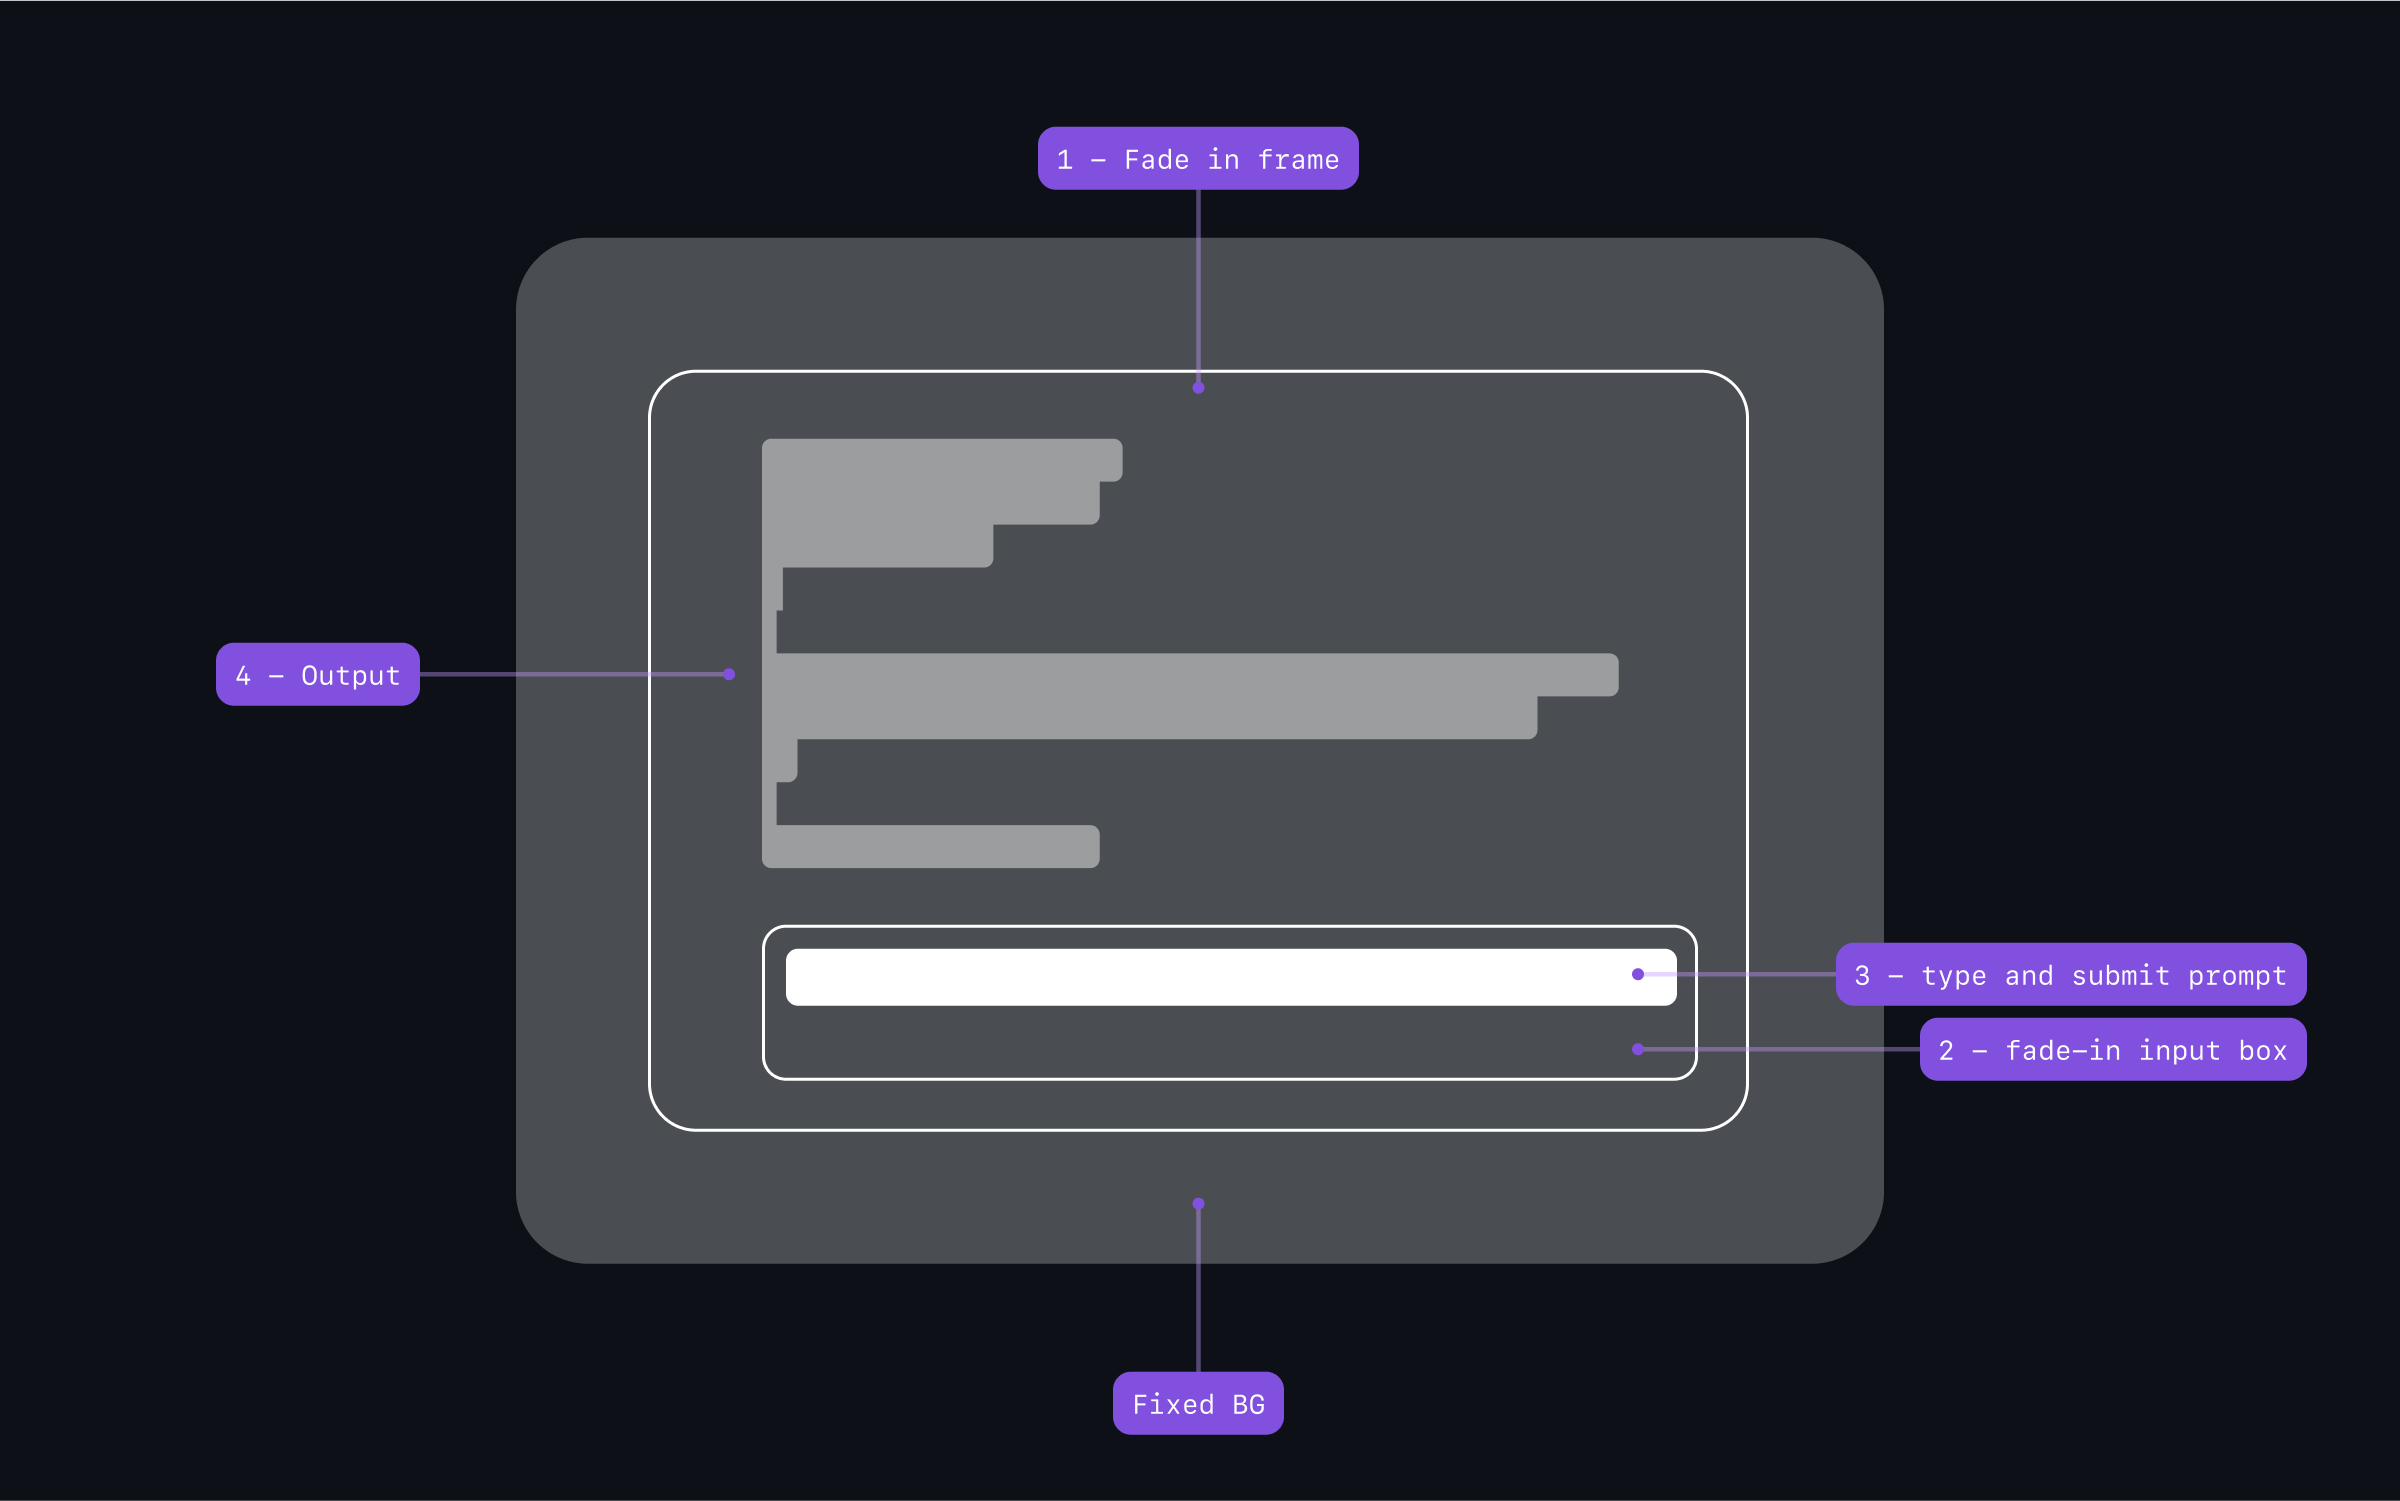 Wireframe view of the different layers presenting the sequence and reveal motion details